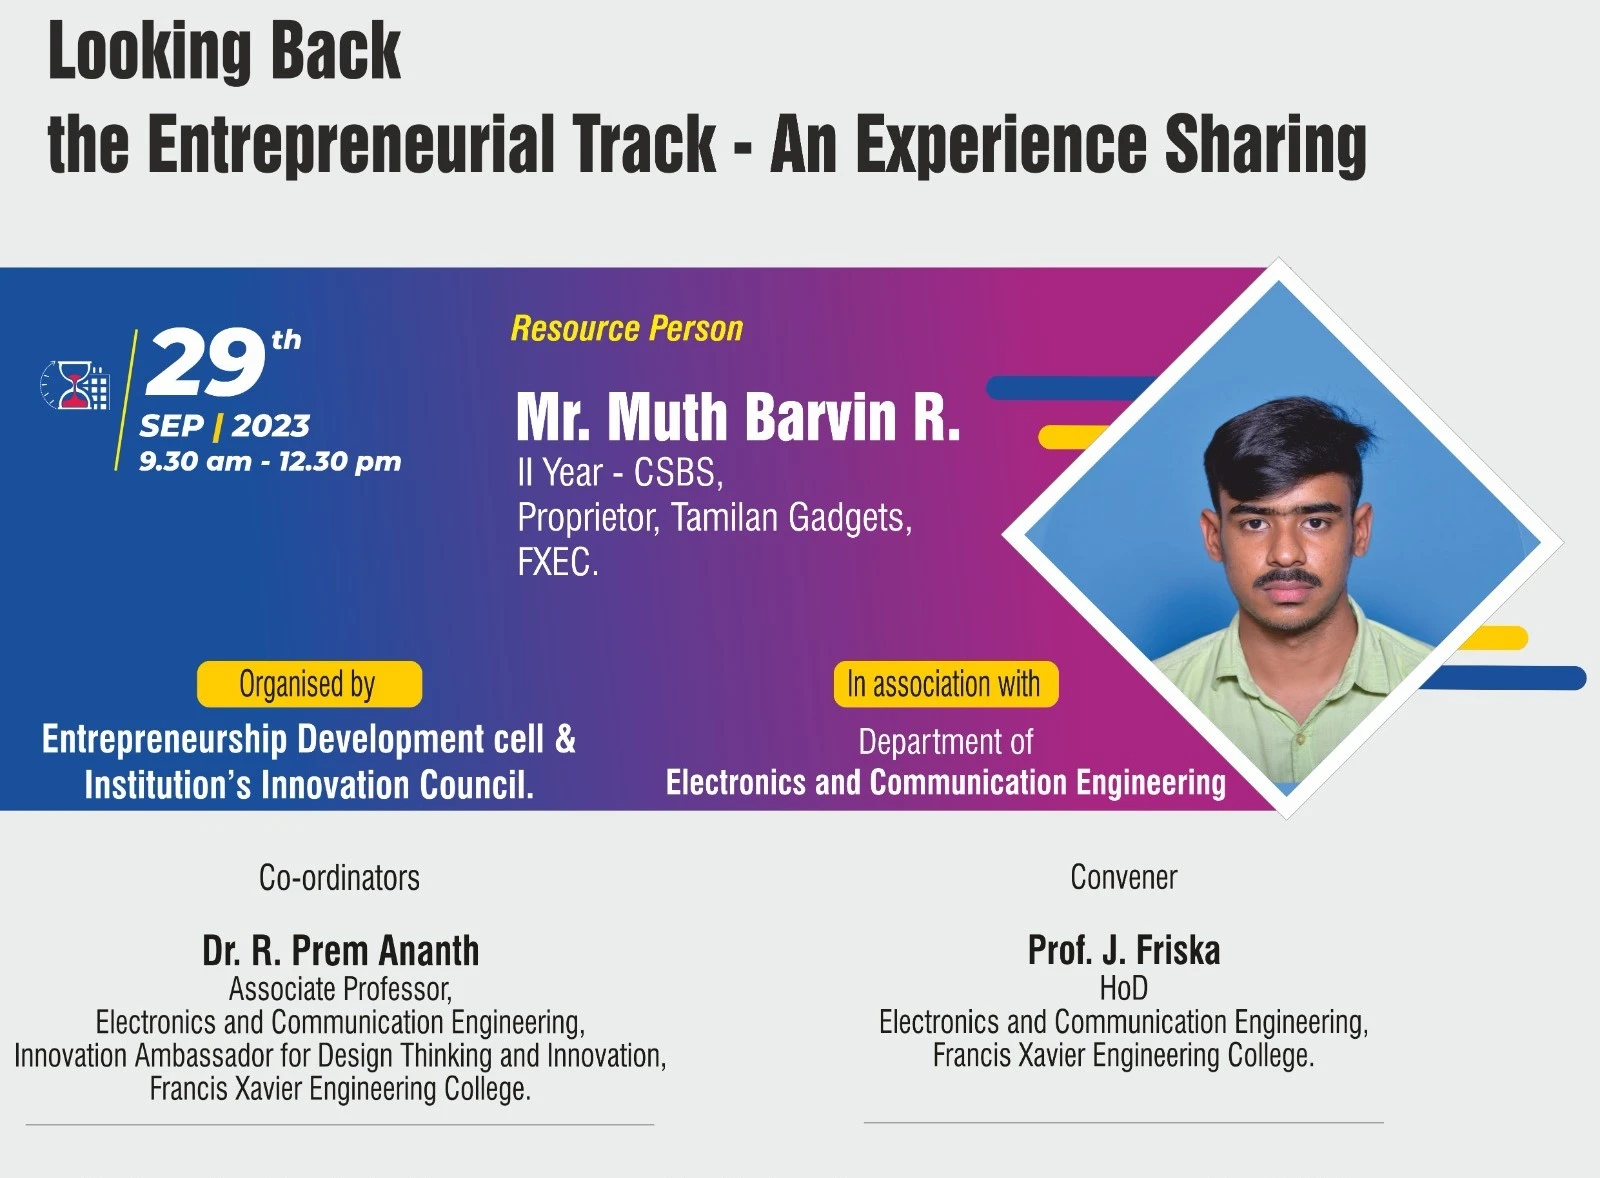 Looking Back the Entrepreneurial Track - An Experience Sharing